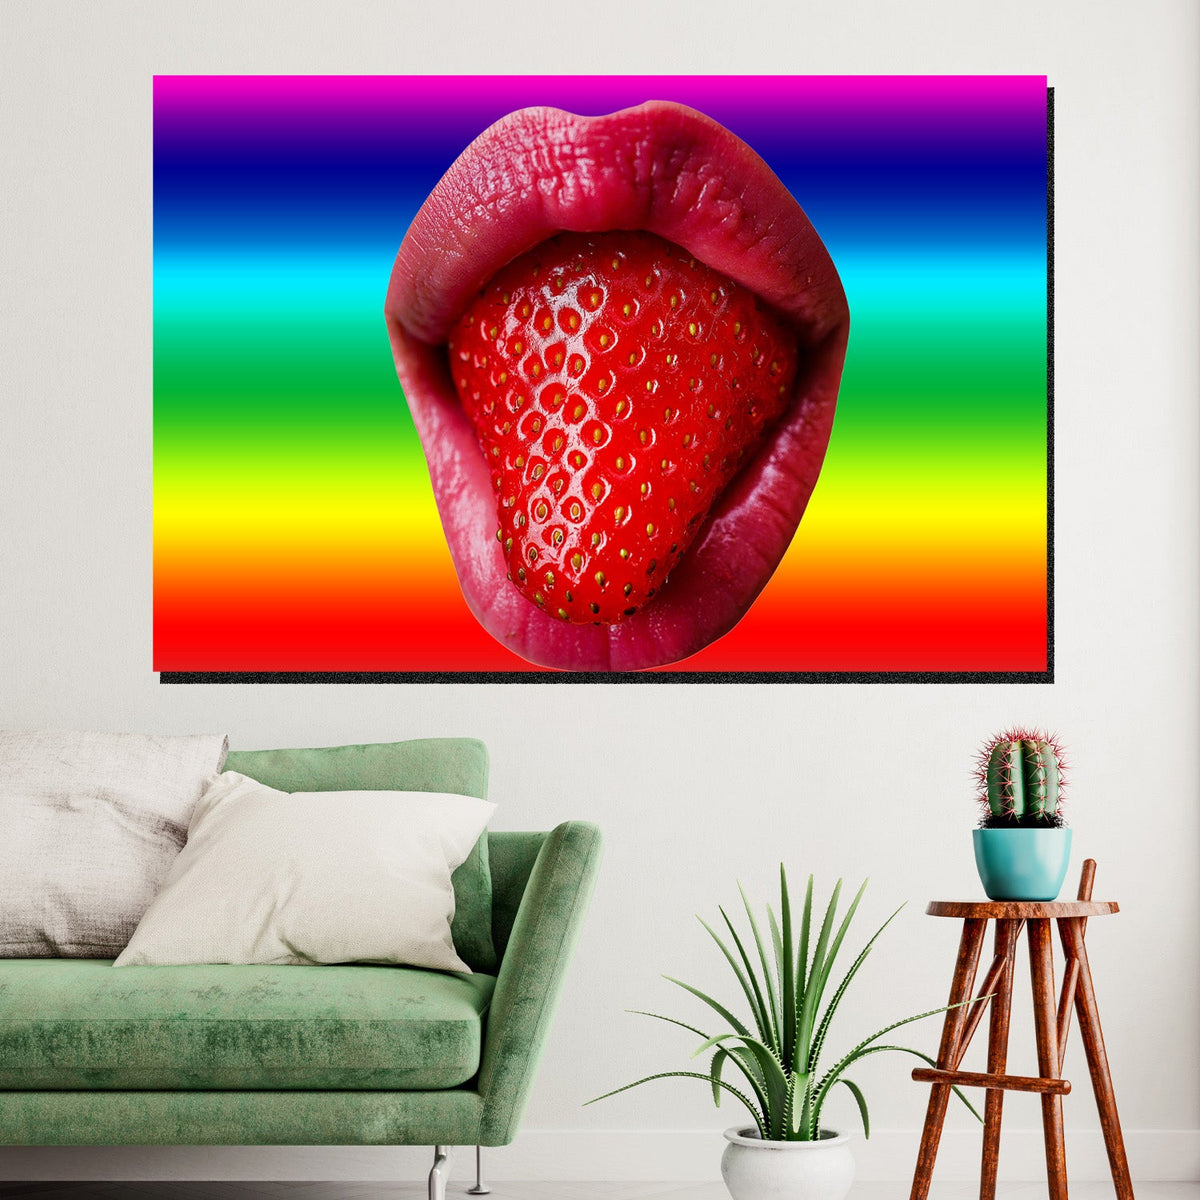 https://cdn.shopify.com/s/files/1/0387/9986/8044/products/MouthfulofStrawberryCanvasArtprintStretched-2.jpg